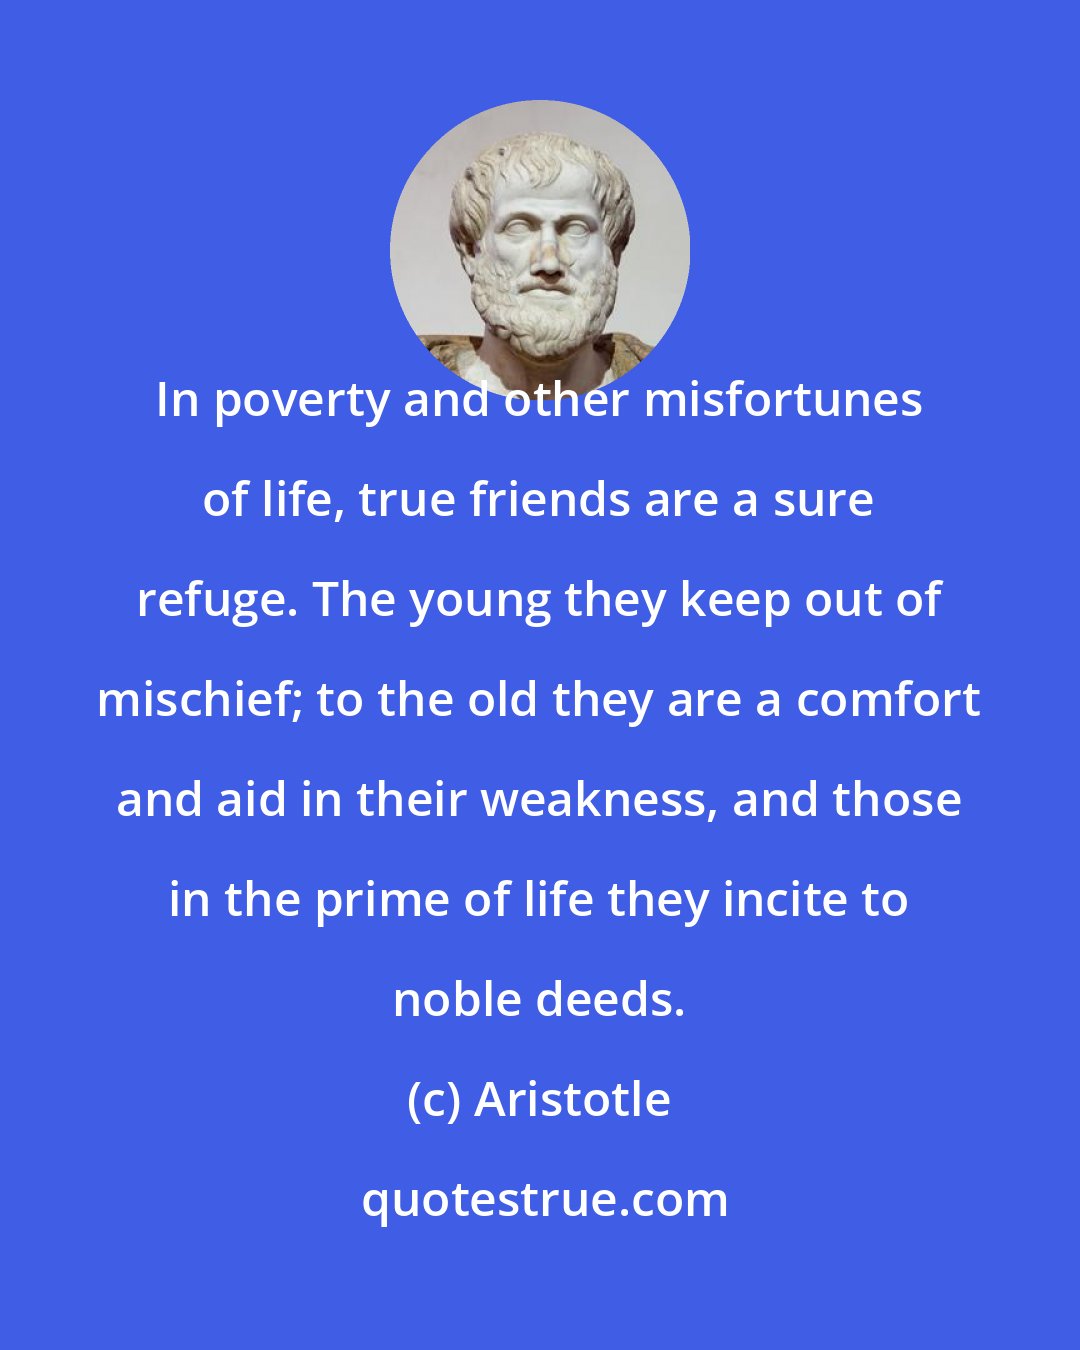 Aristotle: In poverty and other misfortunes of life, true friends are a sure refuge. The young they keep out of mischief; to the old they are a comfort and aid in their weakness, and those in the prime of life they incite to noble deeds.